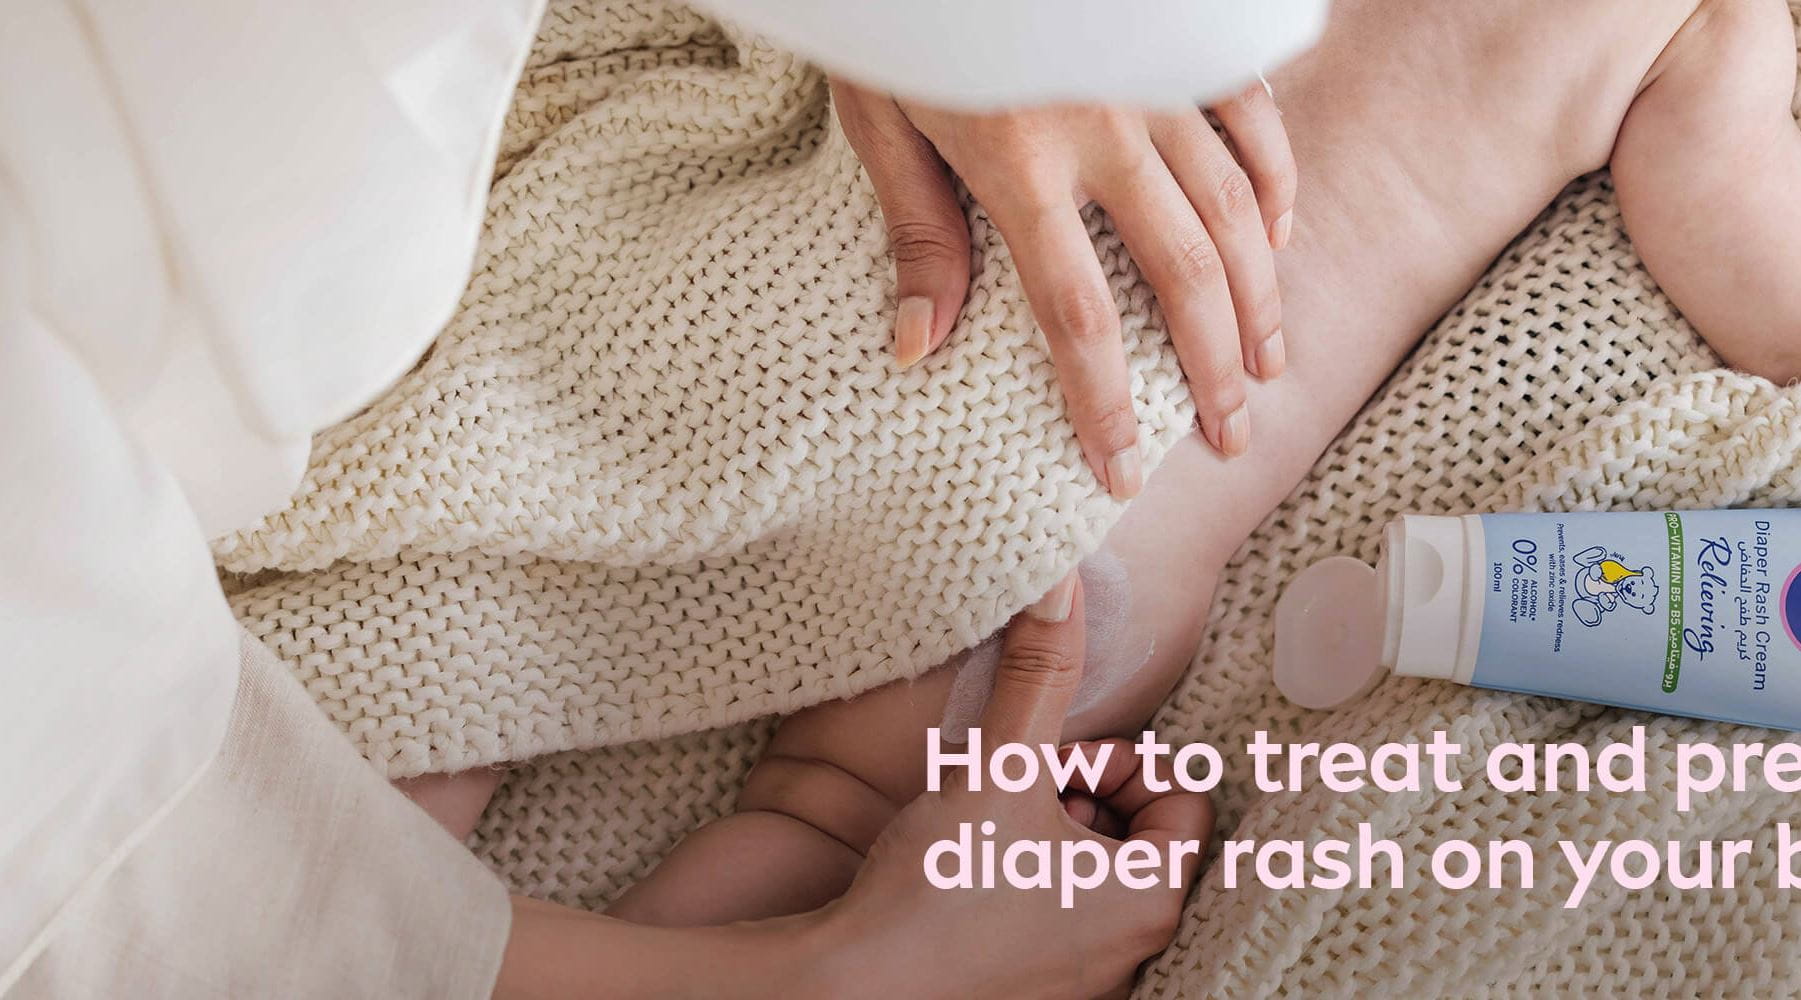 How to Treat & Prevent Diaper Rash on Babies